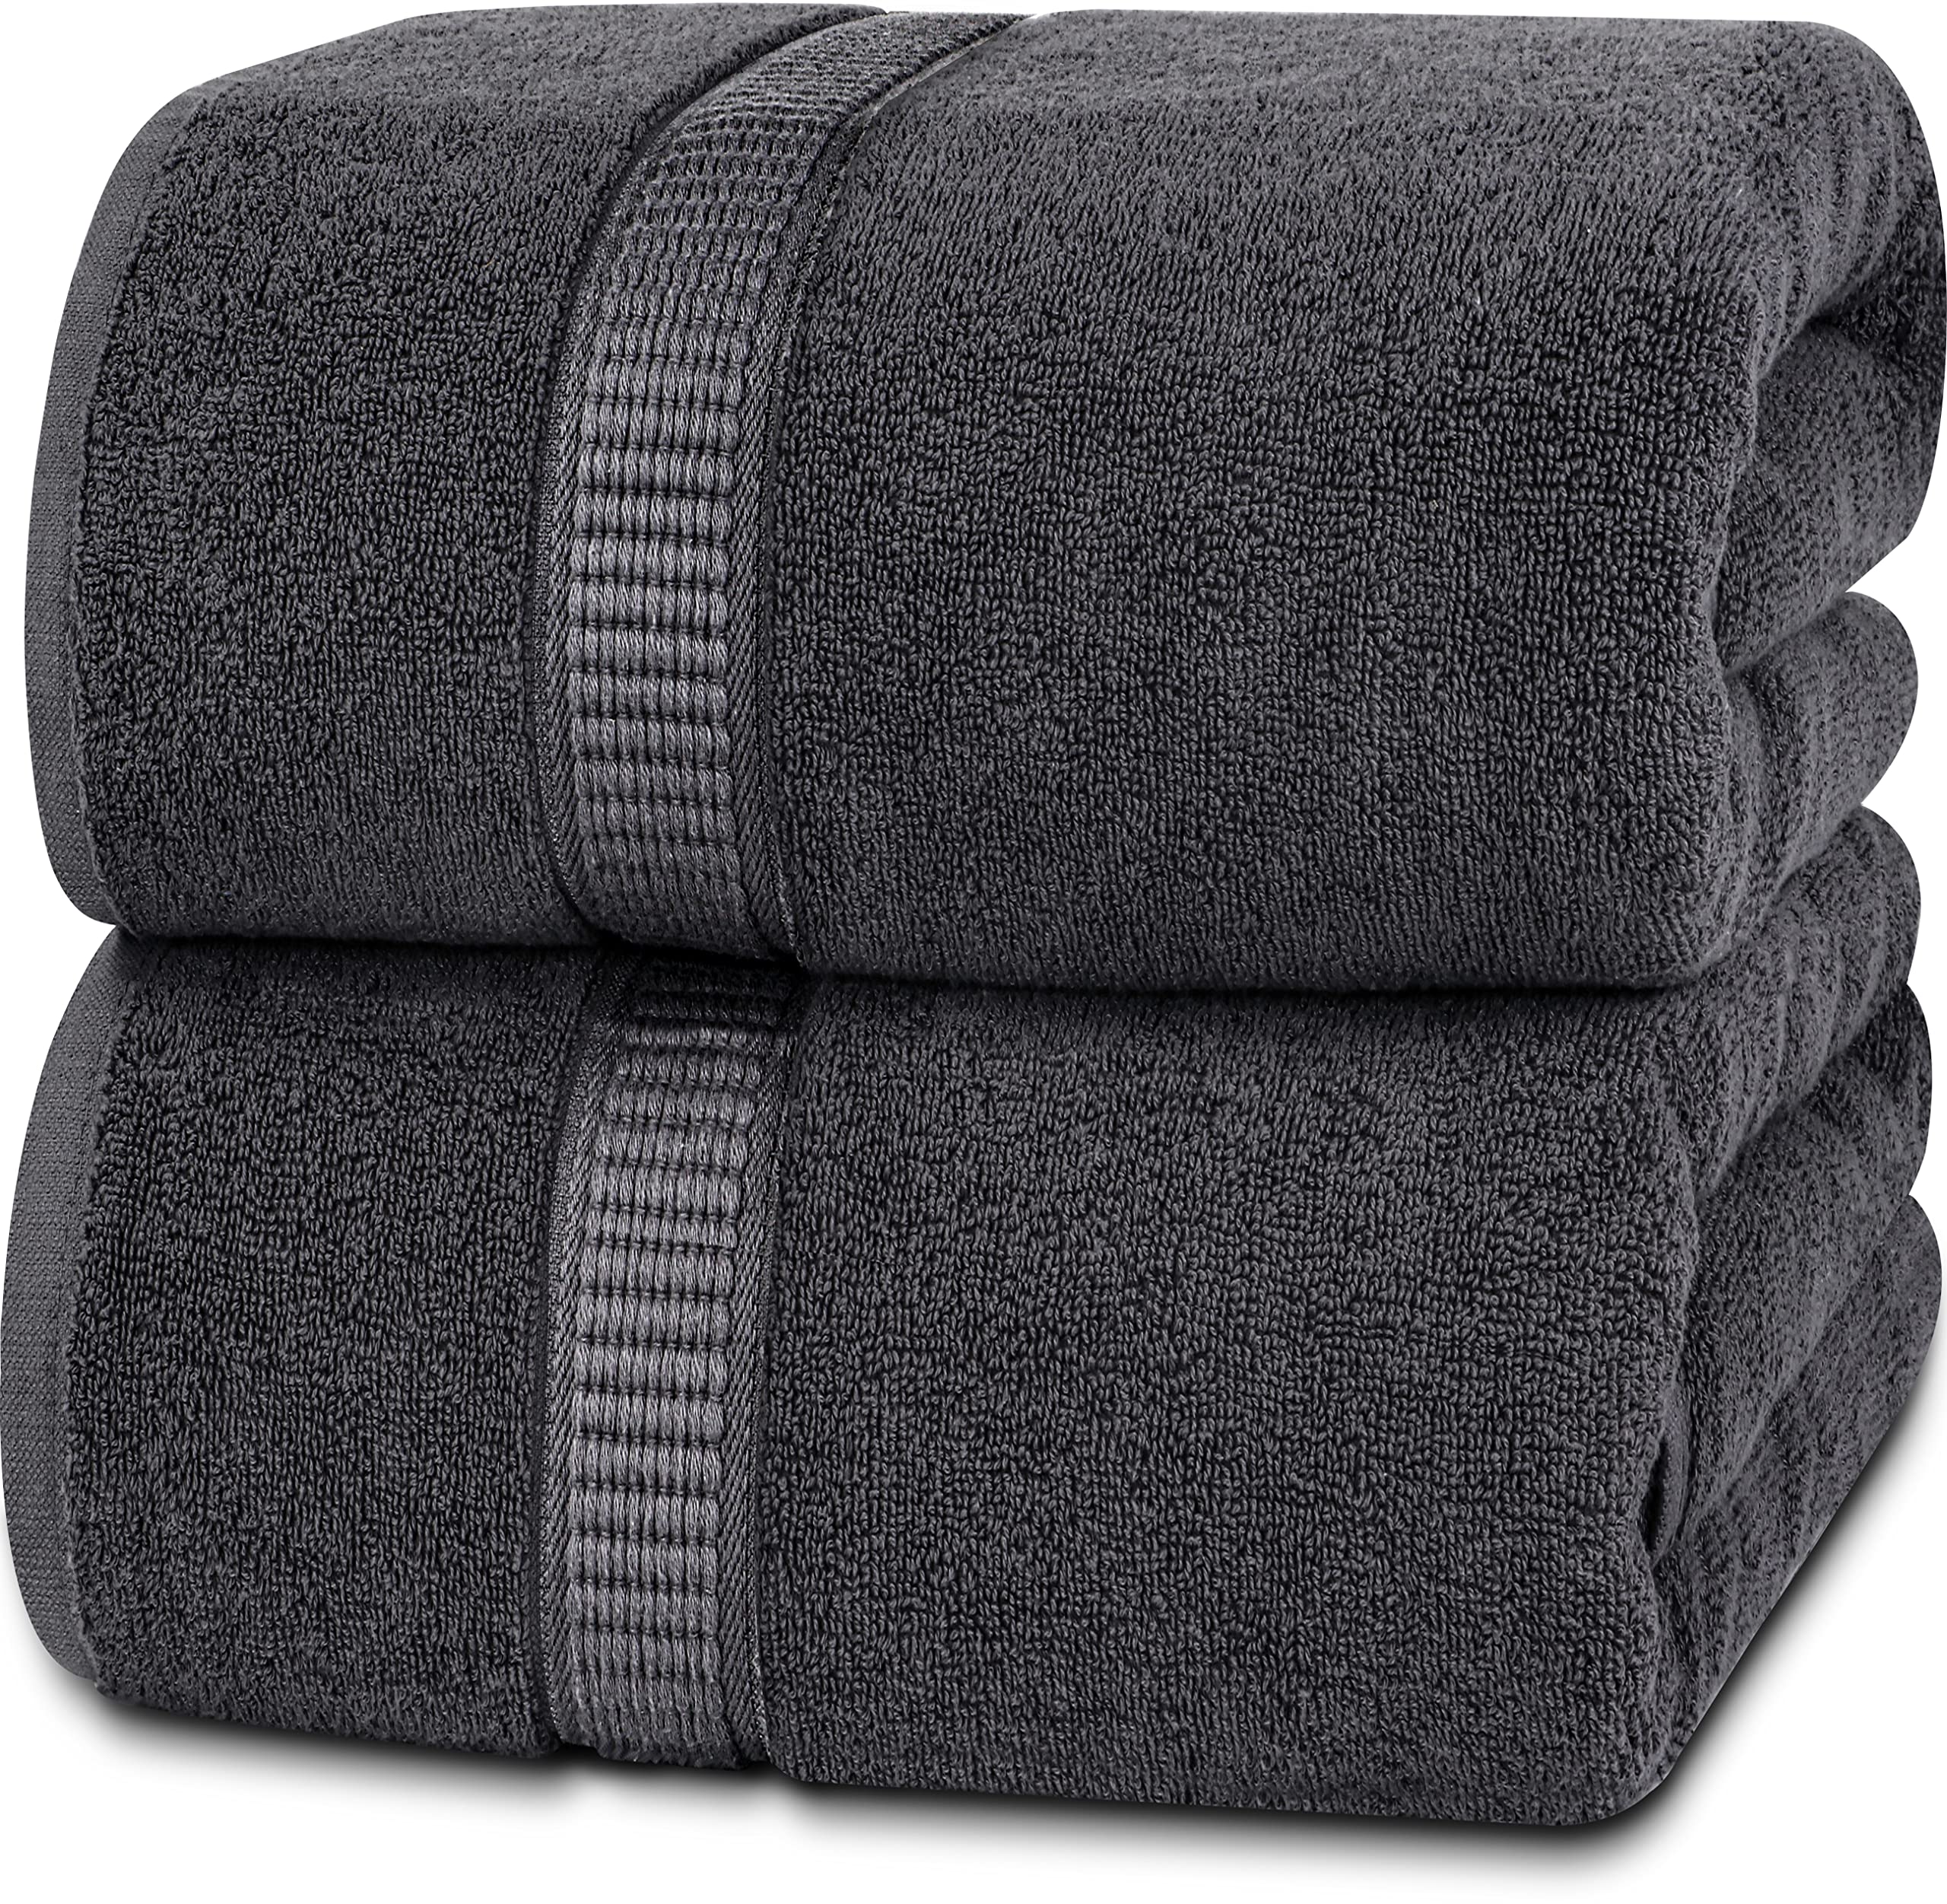  Utopia Extra Thick and Plush Bath Towels - White